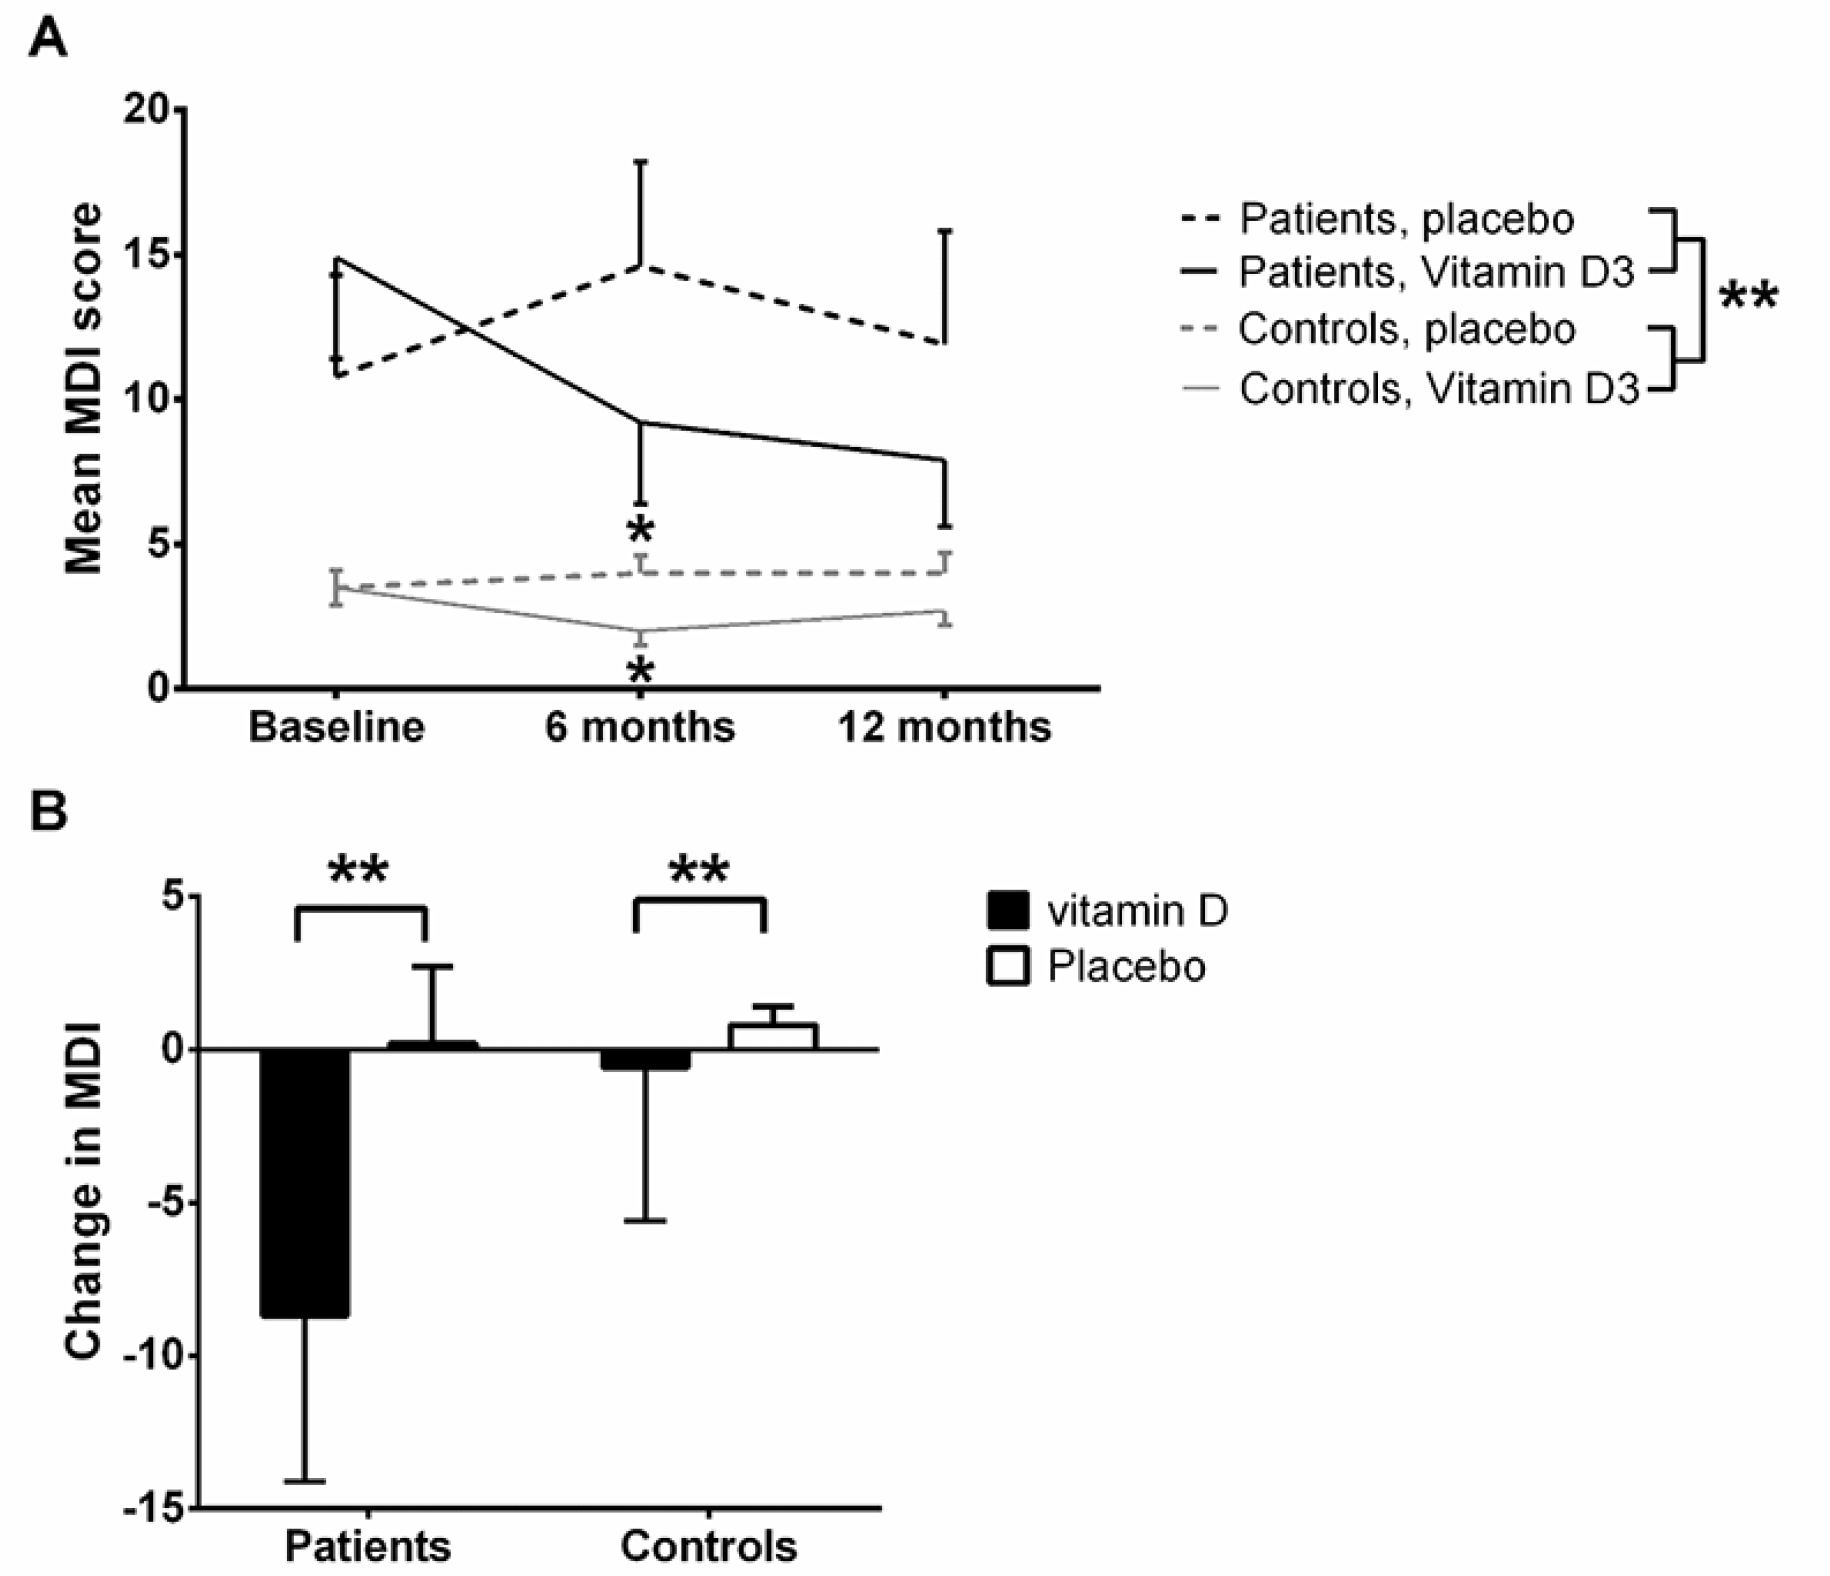 Figure 3 MDI score over time in patients and controls by treatment (vitamin D vs. placebo)